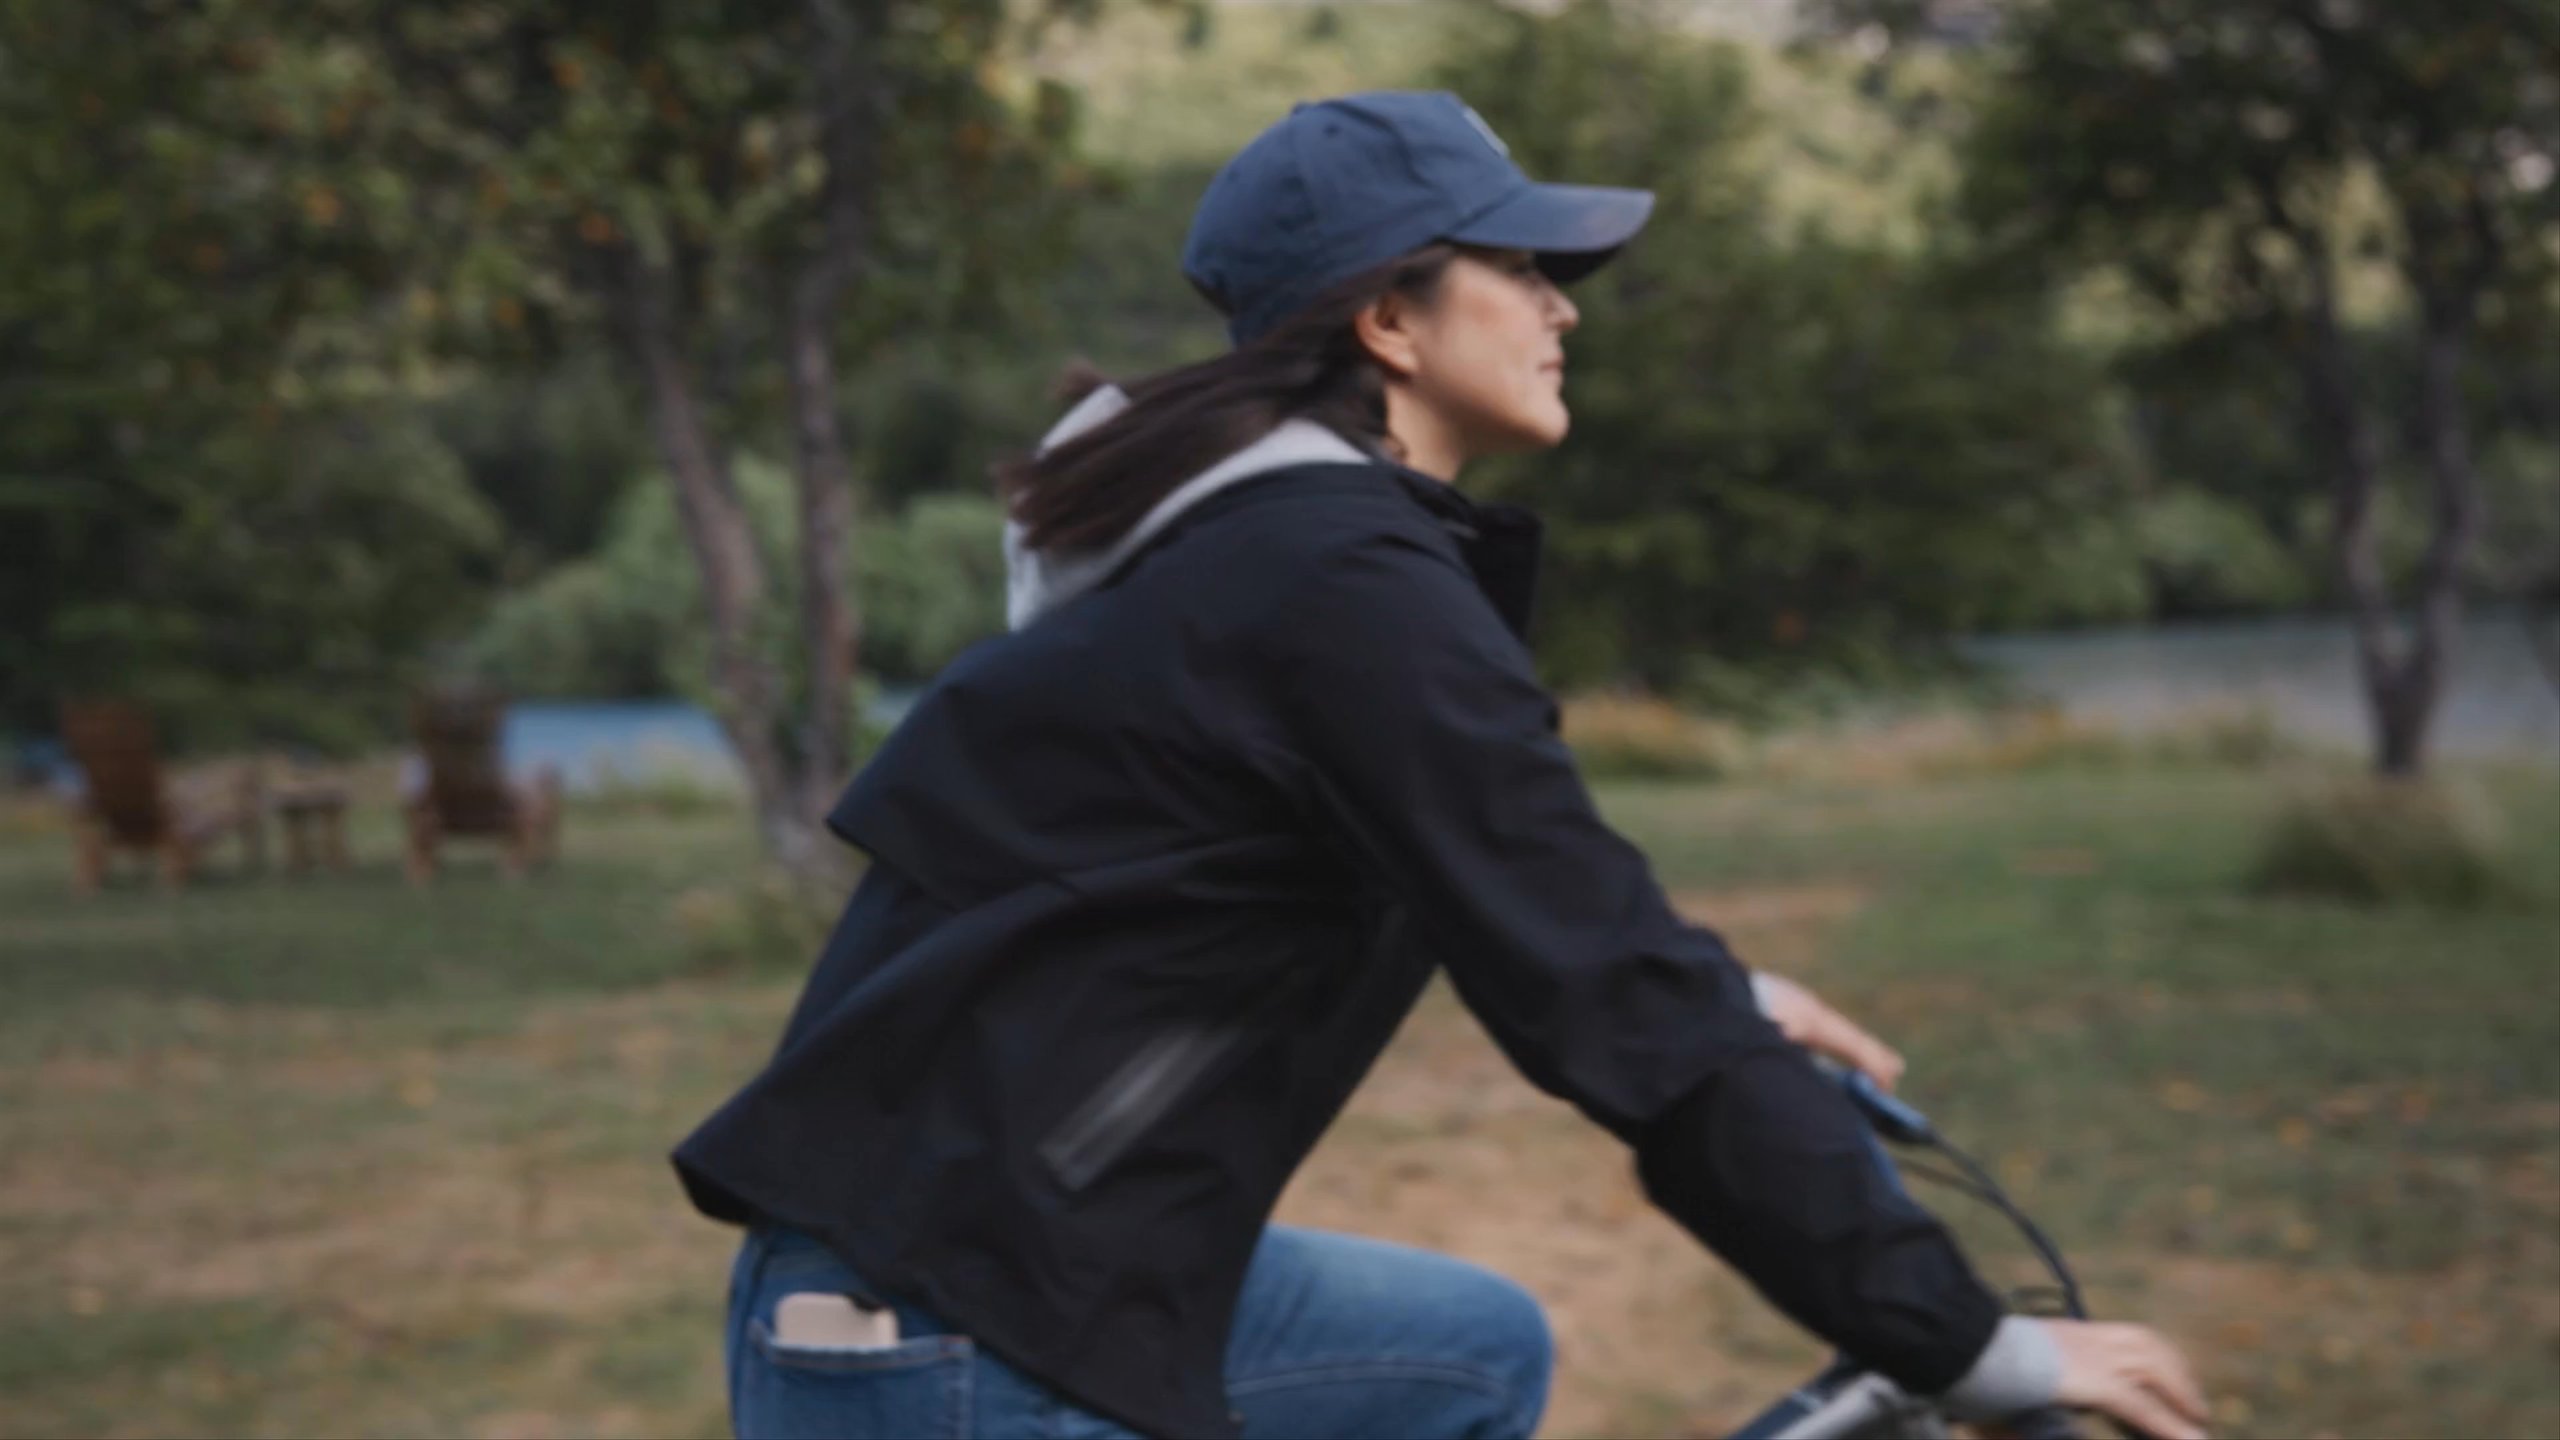 A woman riding bicycle on the field.